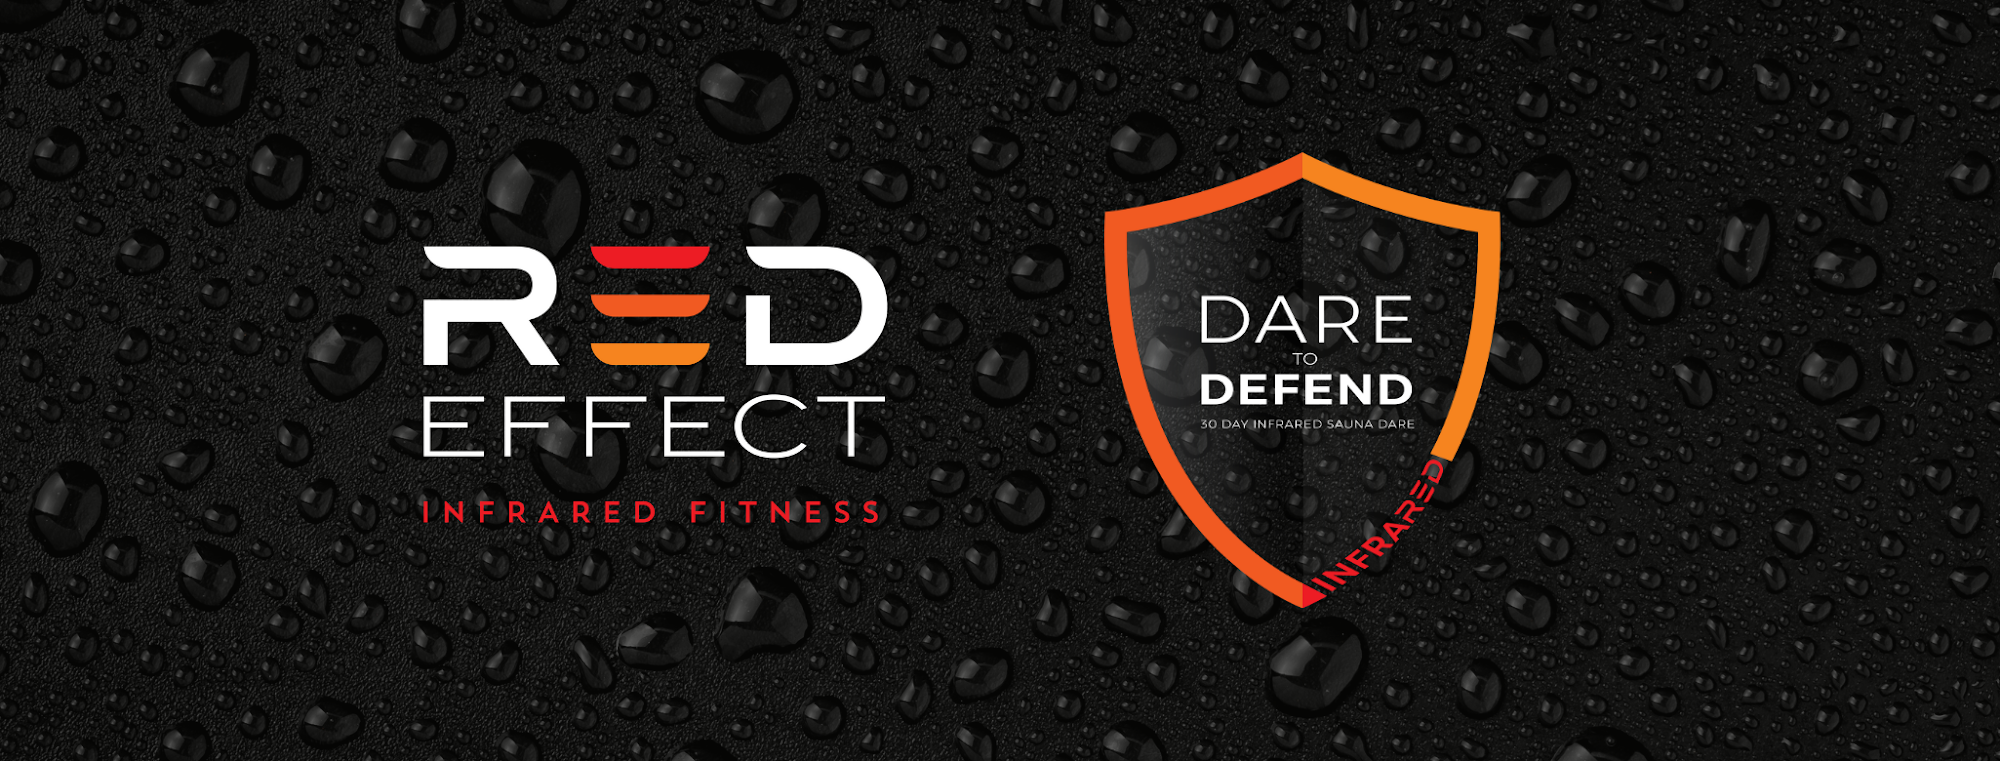 Red Effect Infrared Fitness 21631 Allen Rd, Woodhaven Michigan 48183